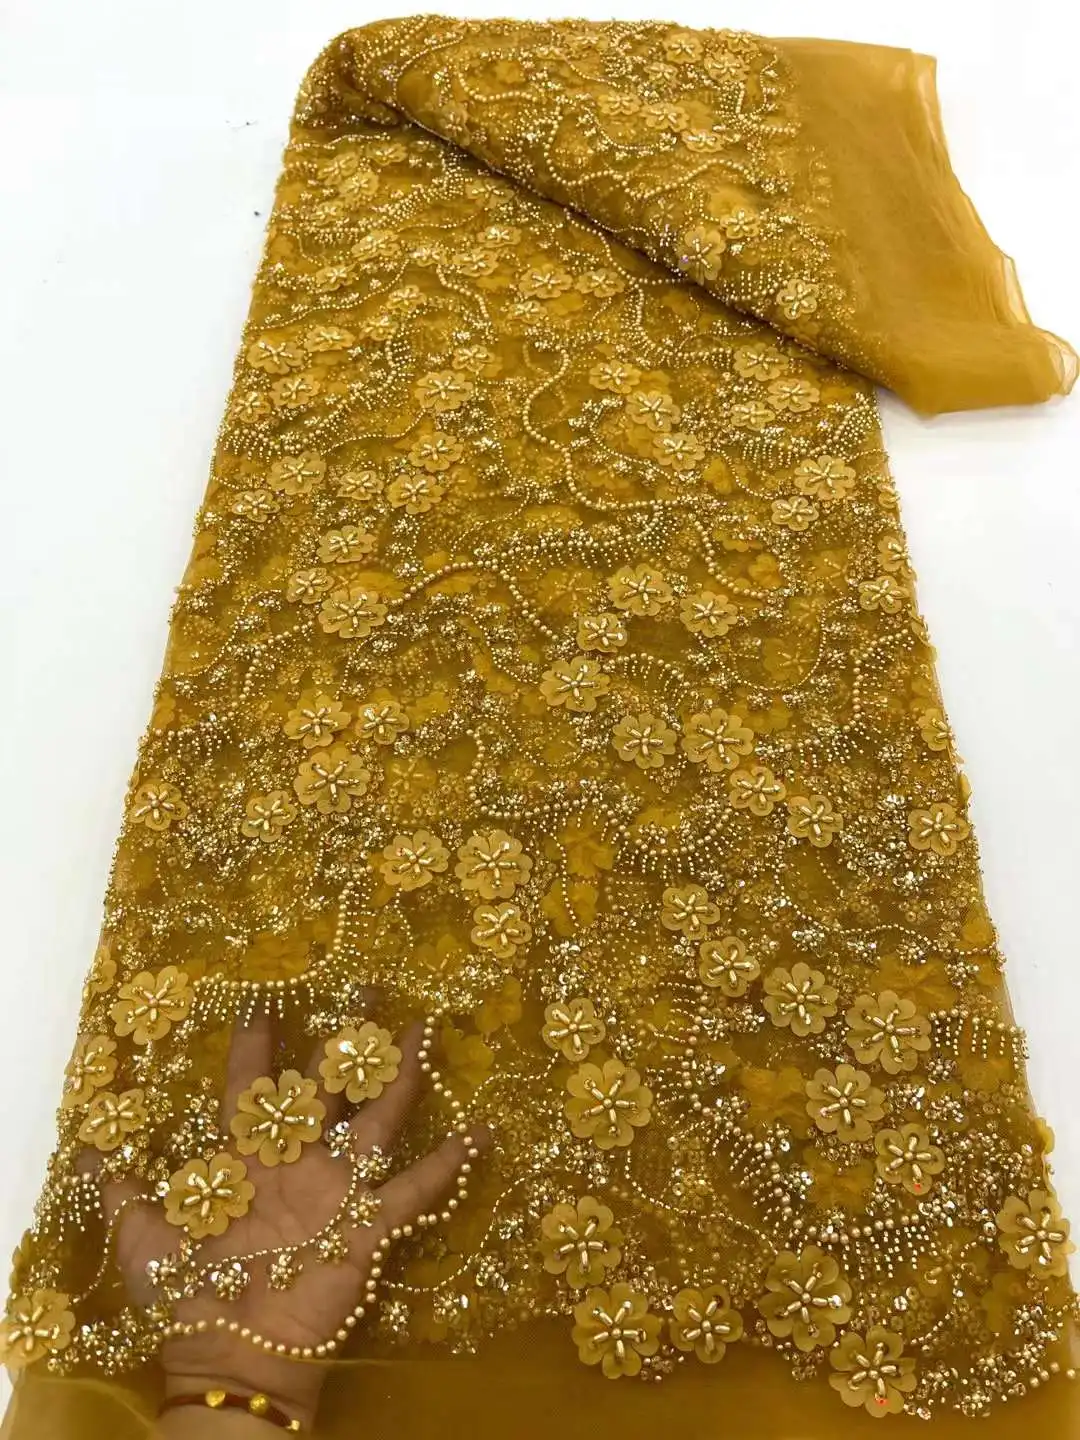 Gold African French Sequins Tulle Lace Fabric 2024 High Quality Embroidery 5 Yards Nigerian Beaded Lace Fabrics For Party Dress anna latest sequin french lace fabric 2019 high quality embroidery african tulle lace fabrics with sequins 5 yards pcs for dress